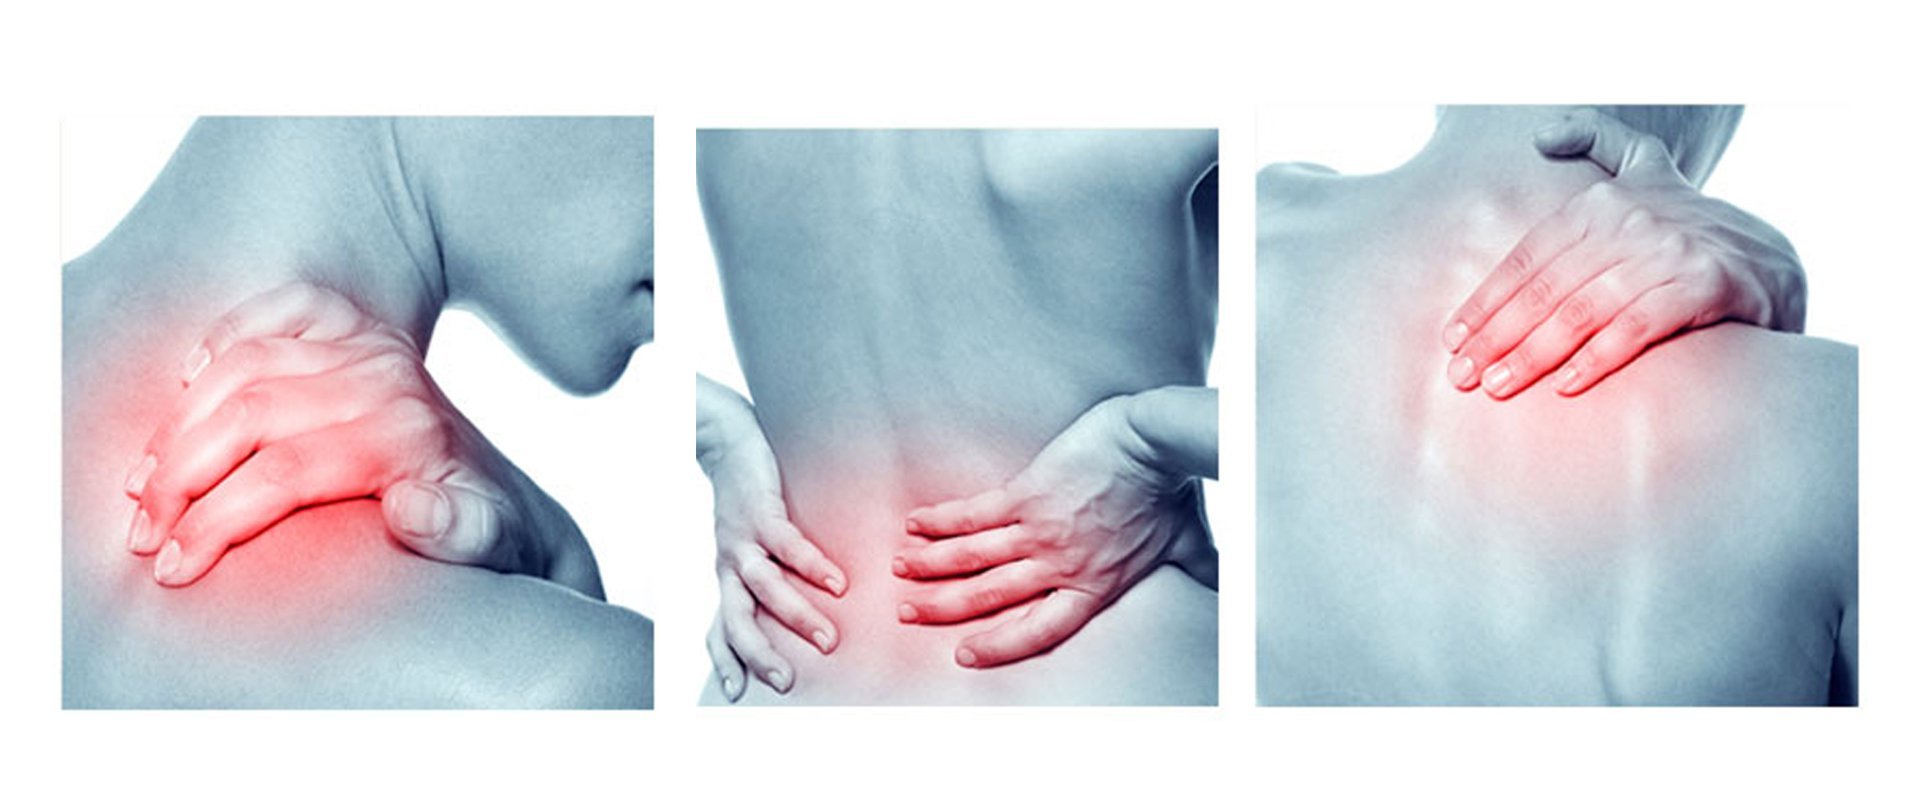 SPECIAL TREATMENT APPROACHES TO BACK AND NECK PAIN